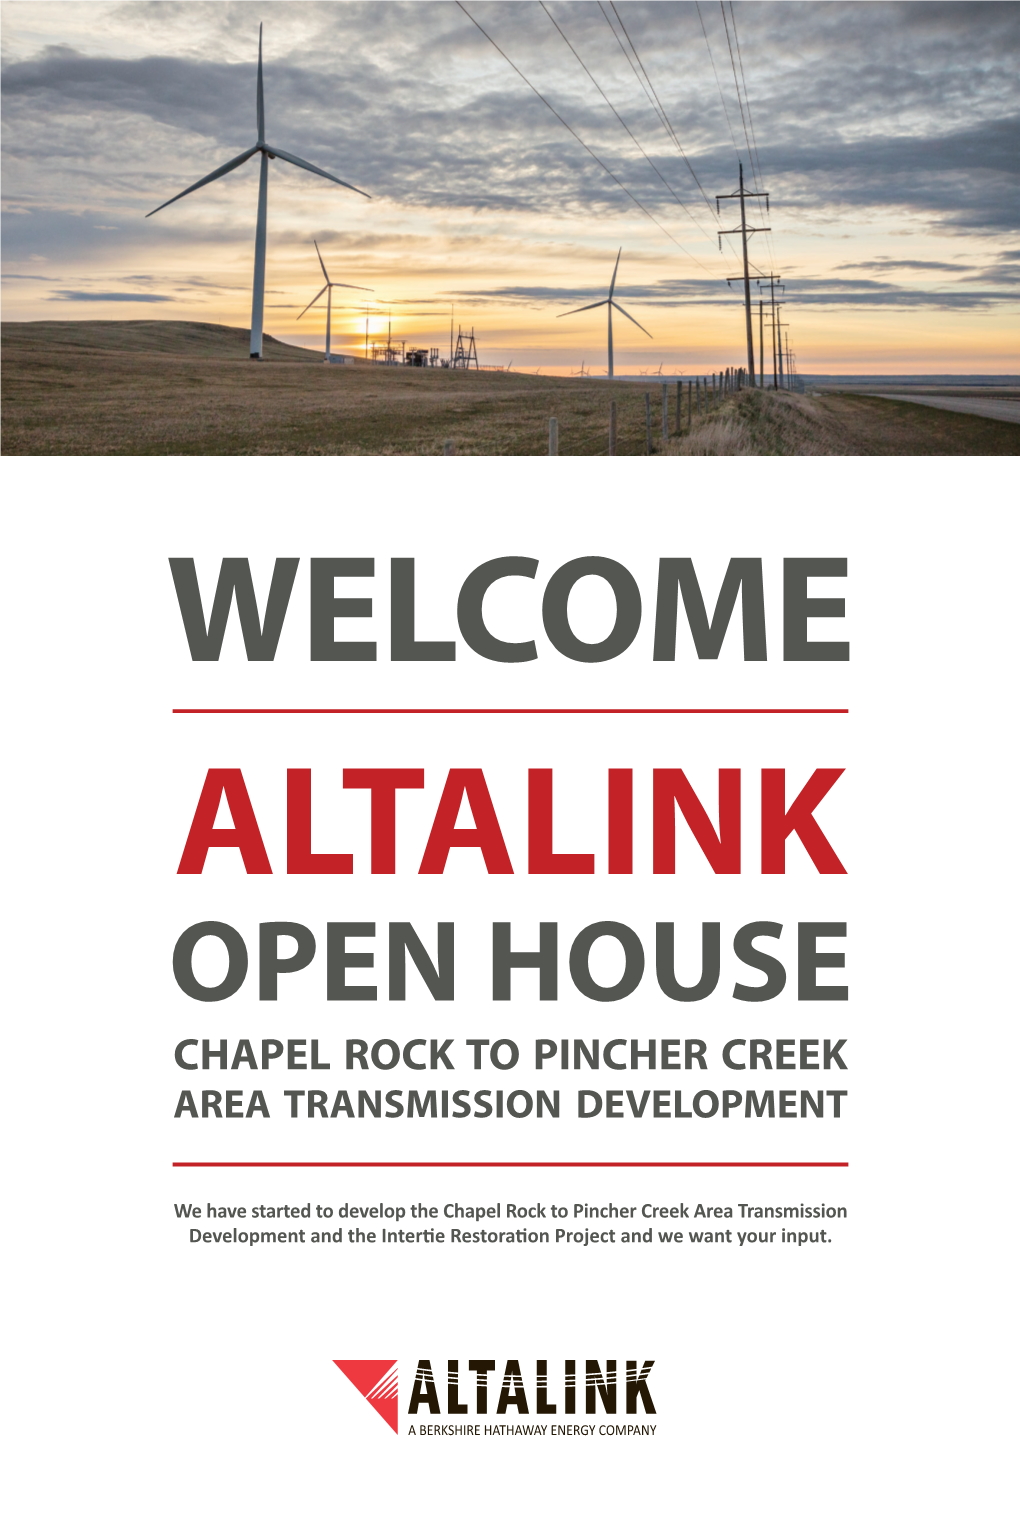 We Have Started to Develop the Chapel Rock to Pincher Creek Area Transmission Development and the Intertie Restoration Project and We Want Your Input